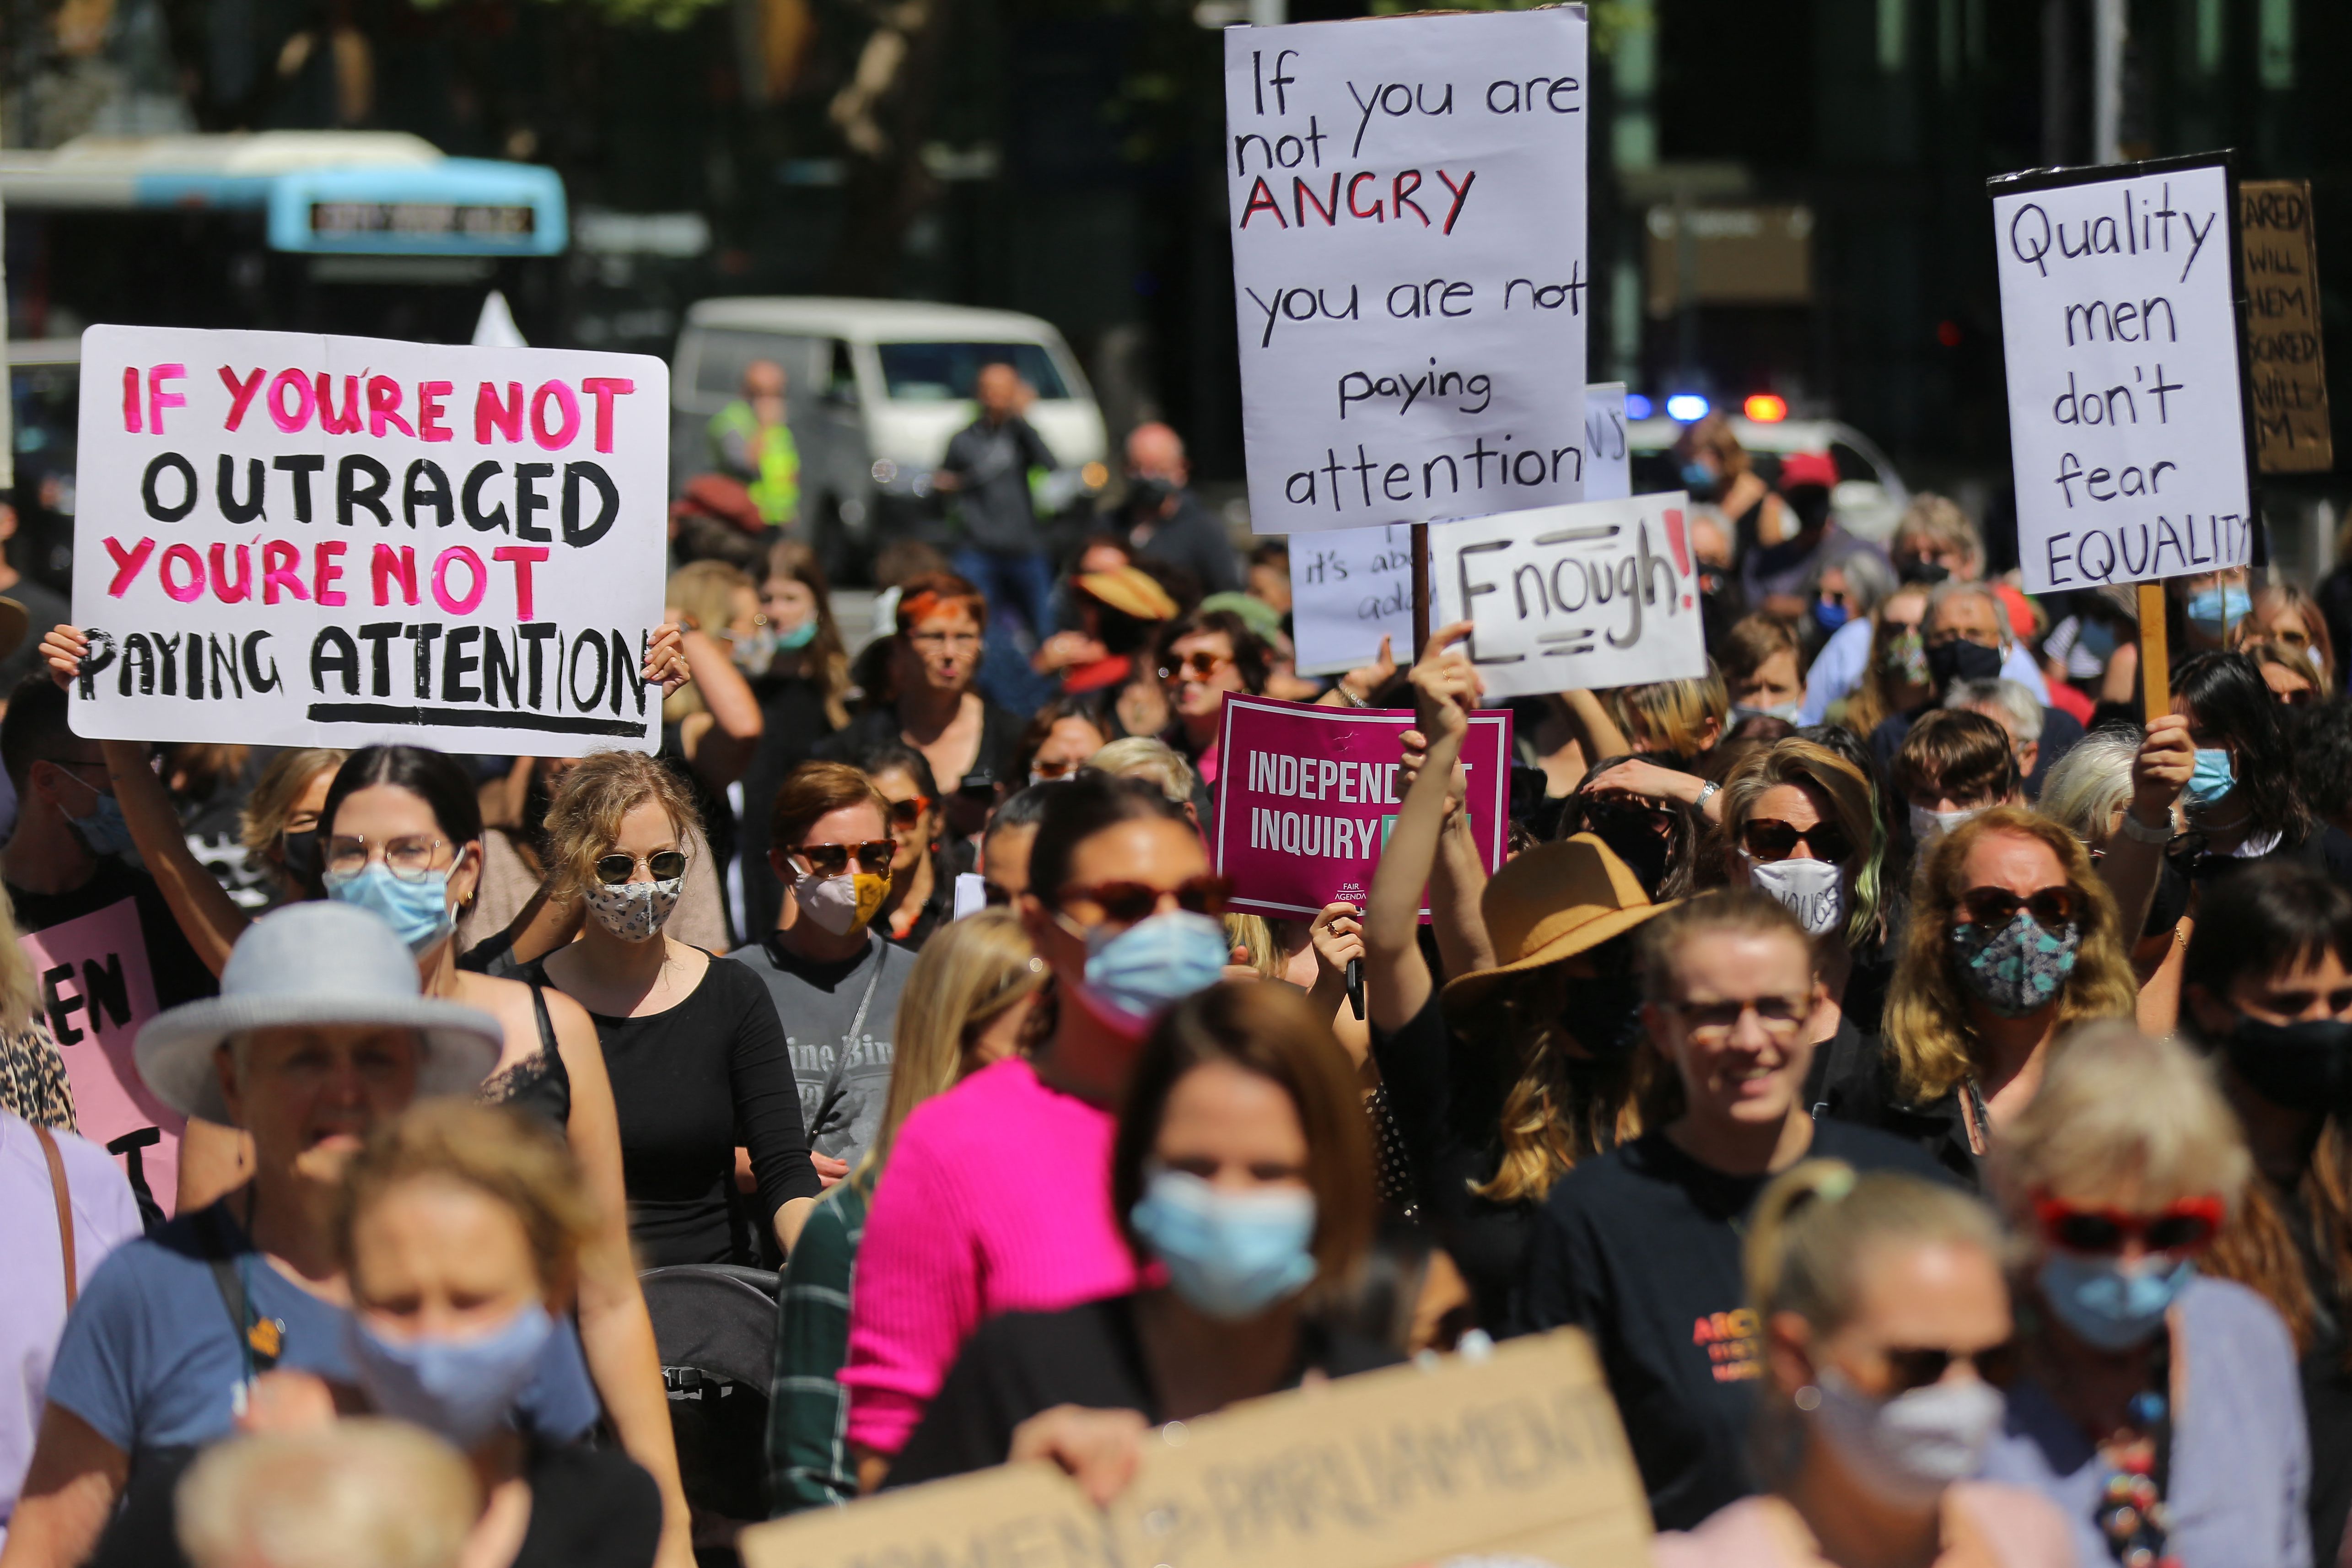  Protesters attend a rally against sexual violence and gender inequality in Sydney on March 15